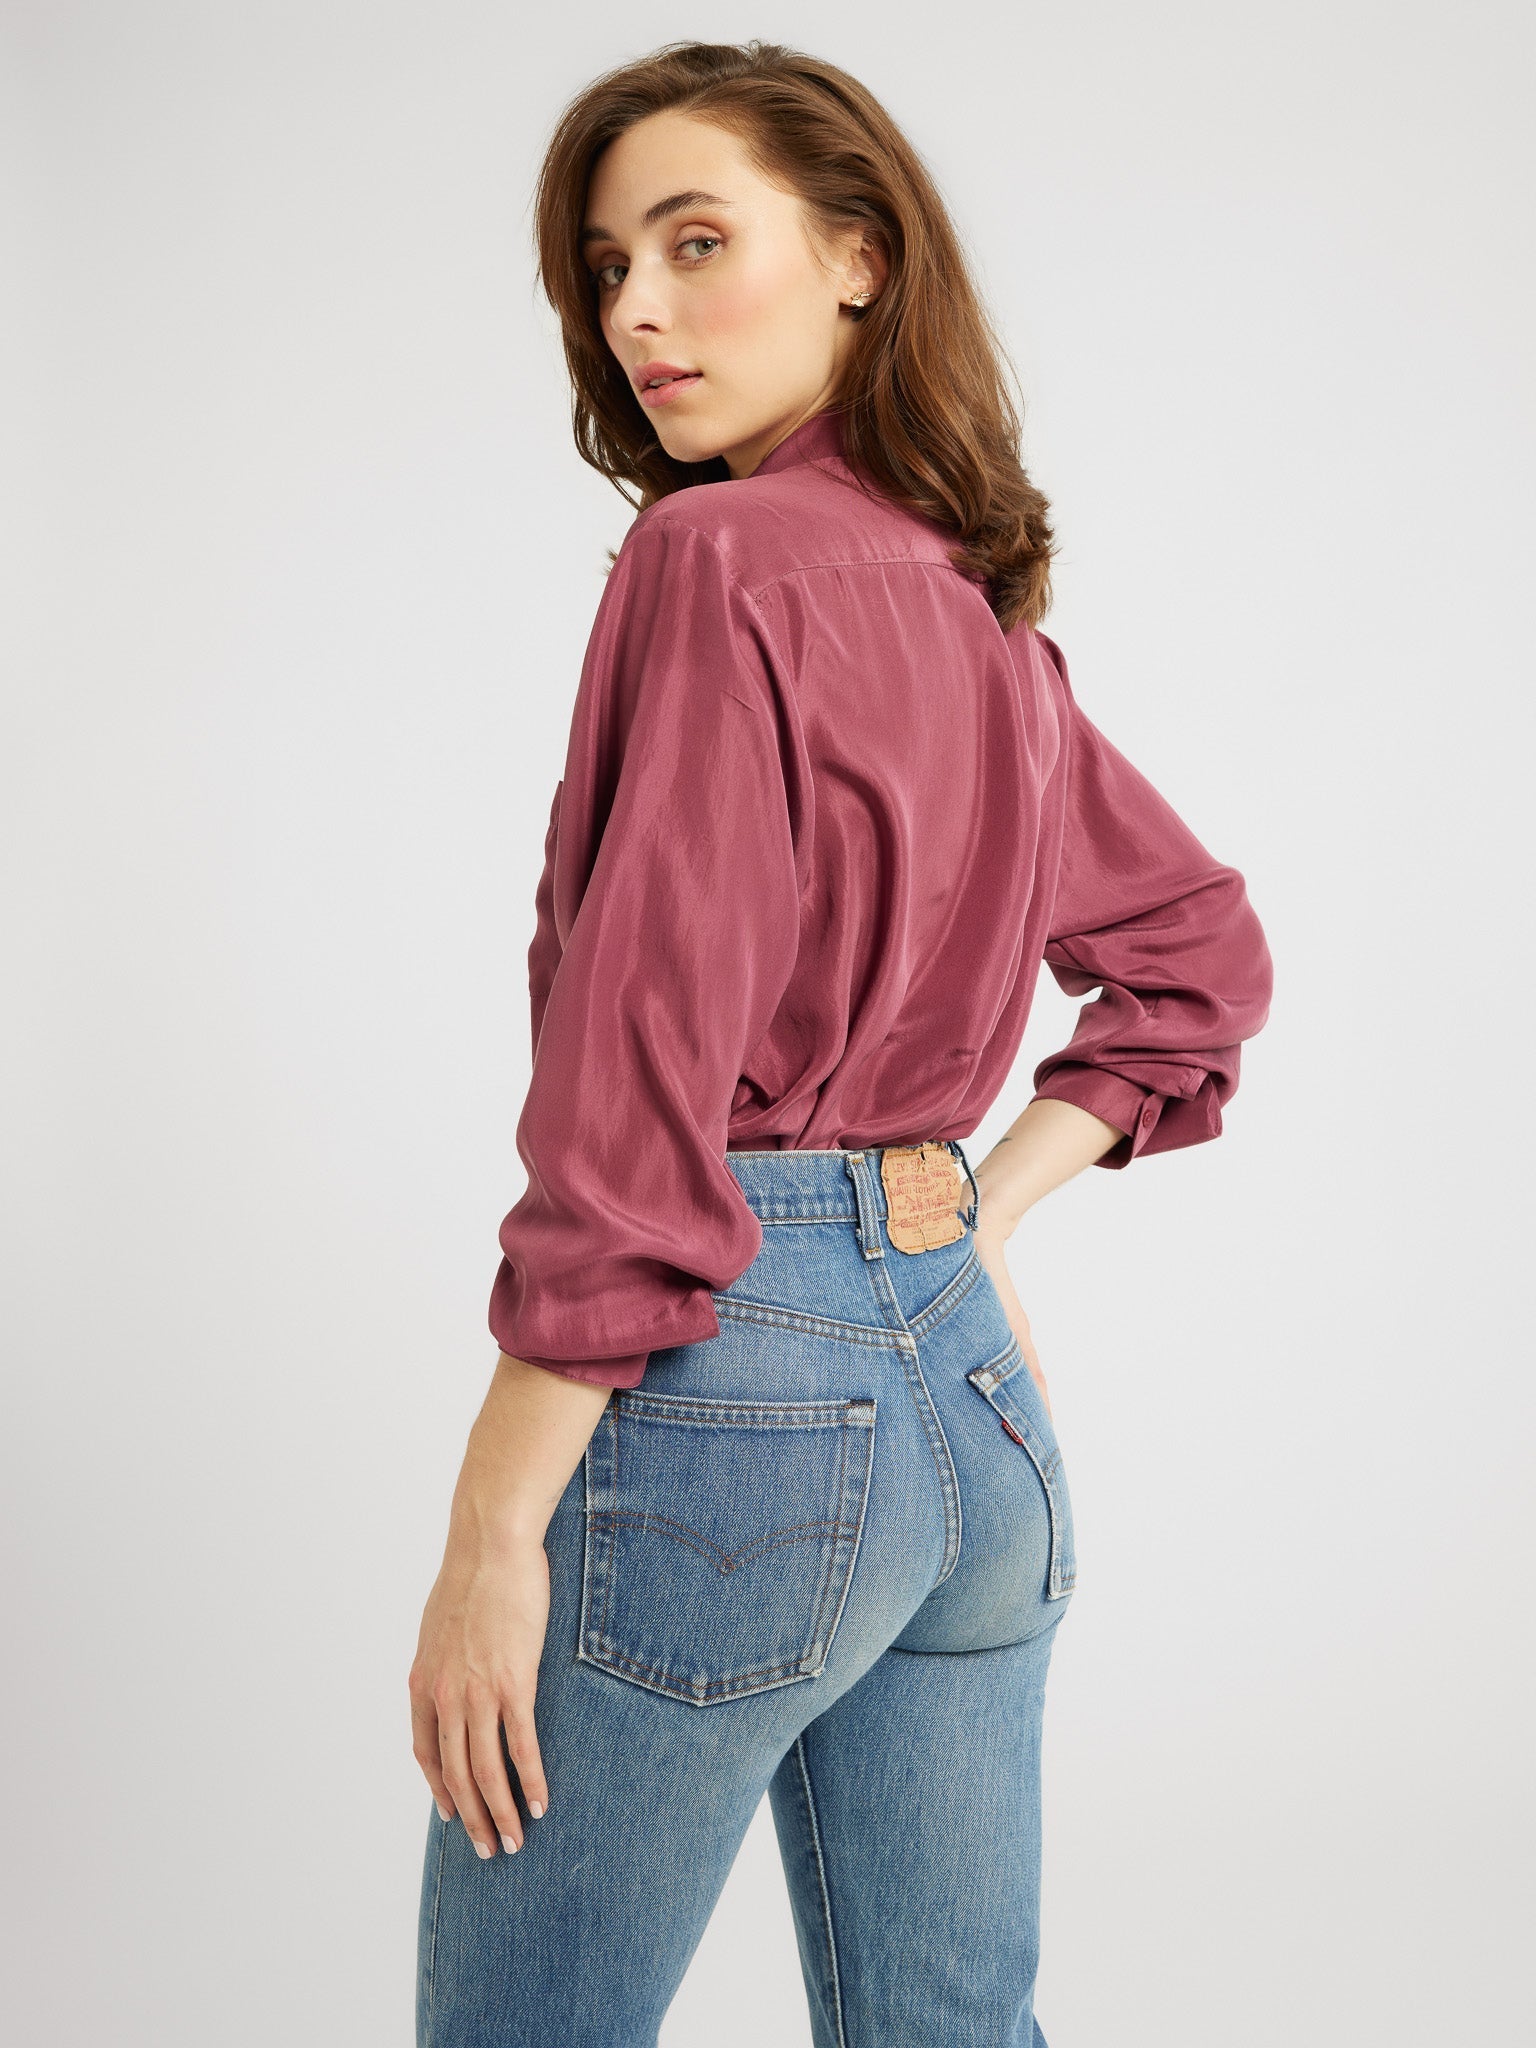 Sofia Top in Plum Washed Silk – MILLE